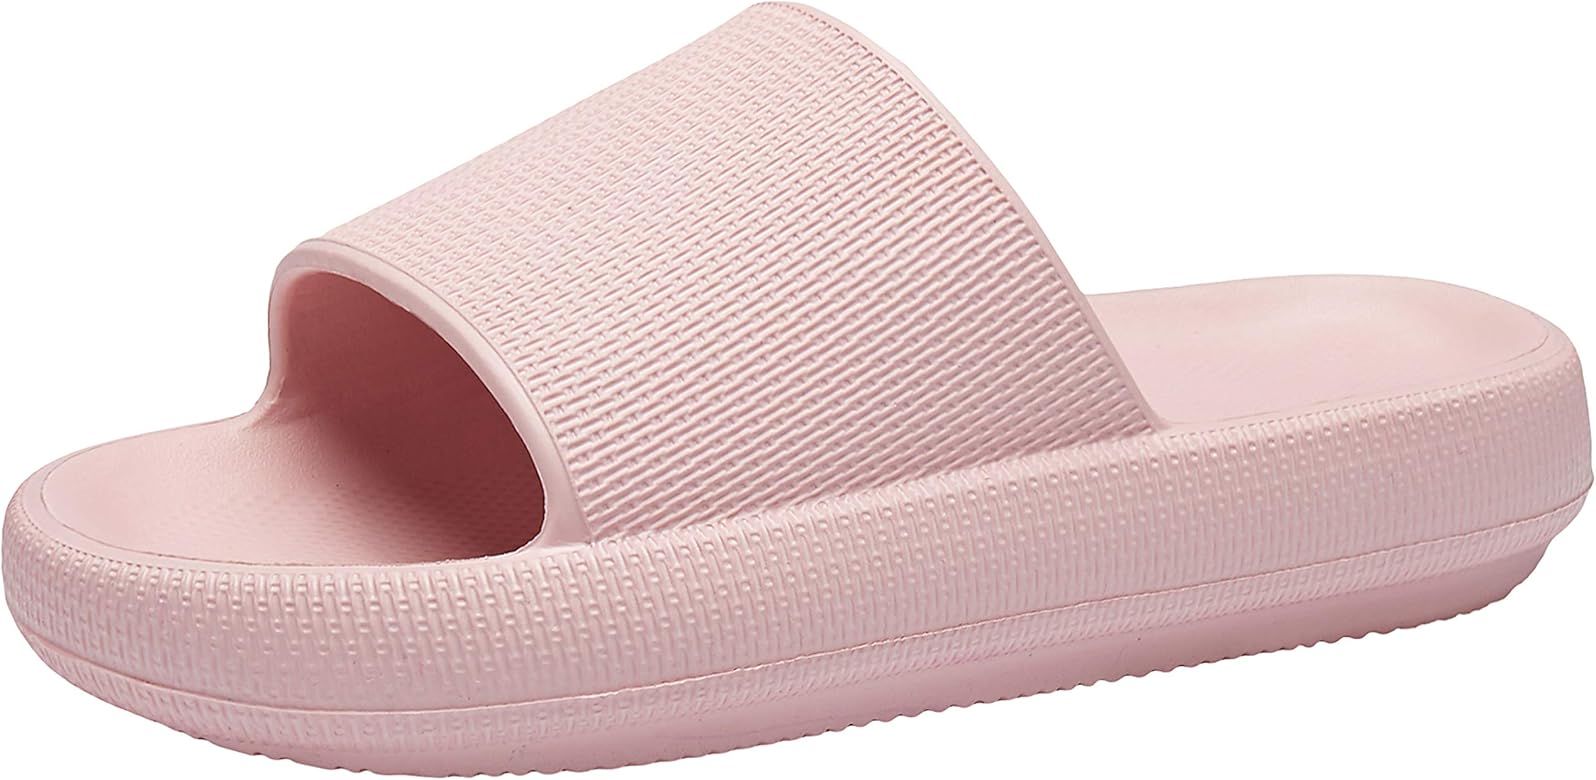 Slippers for Women and Men Quick Drying Bathroom Shower Sandals Open Toe Soft Cushioned Extra Thick  | Amazon (US)